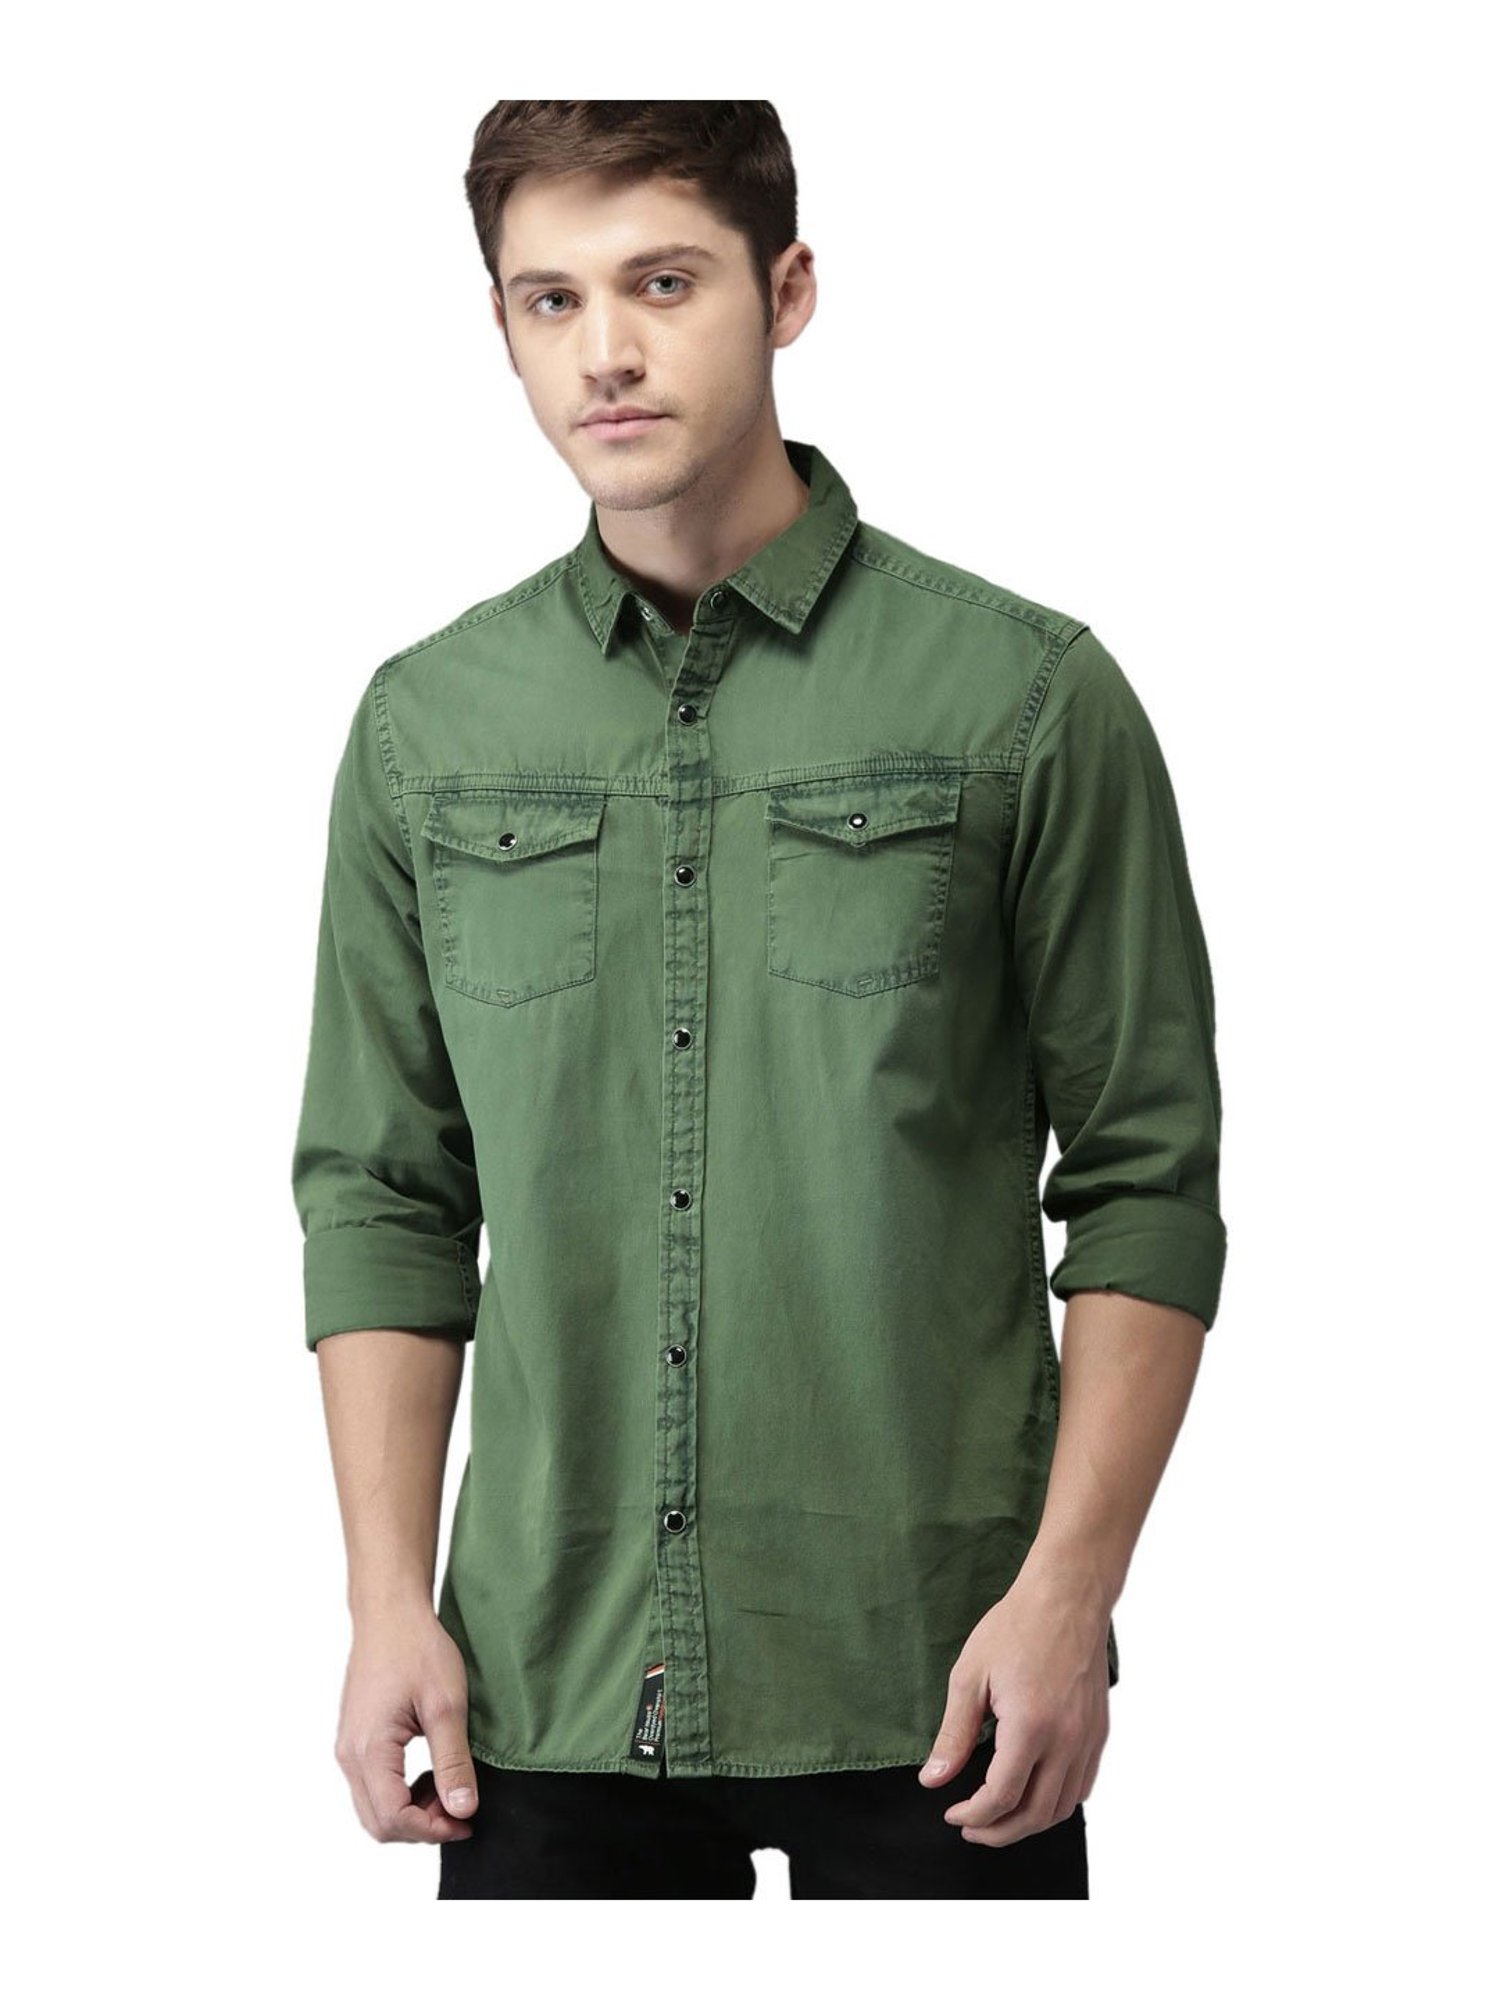 RODID Men Solid Casual Green Shirt - Buy Olive Green RODID Men Solid Casual Green  Shirt Online at Best Prices in India | Flipkart.com